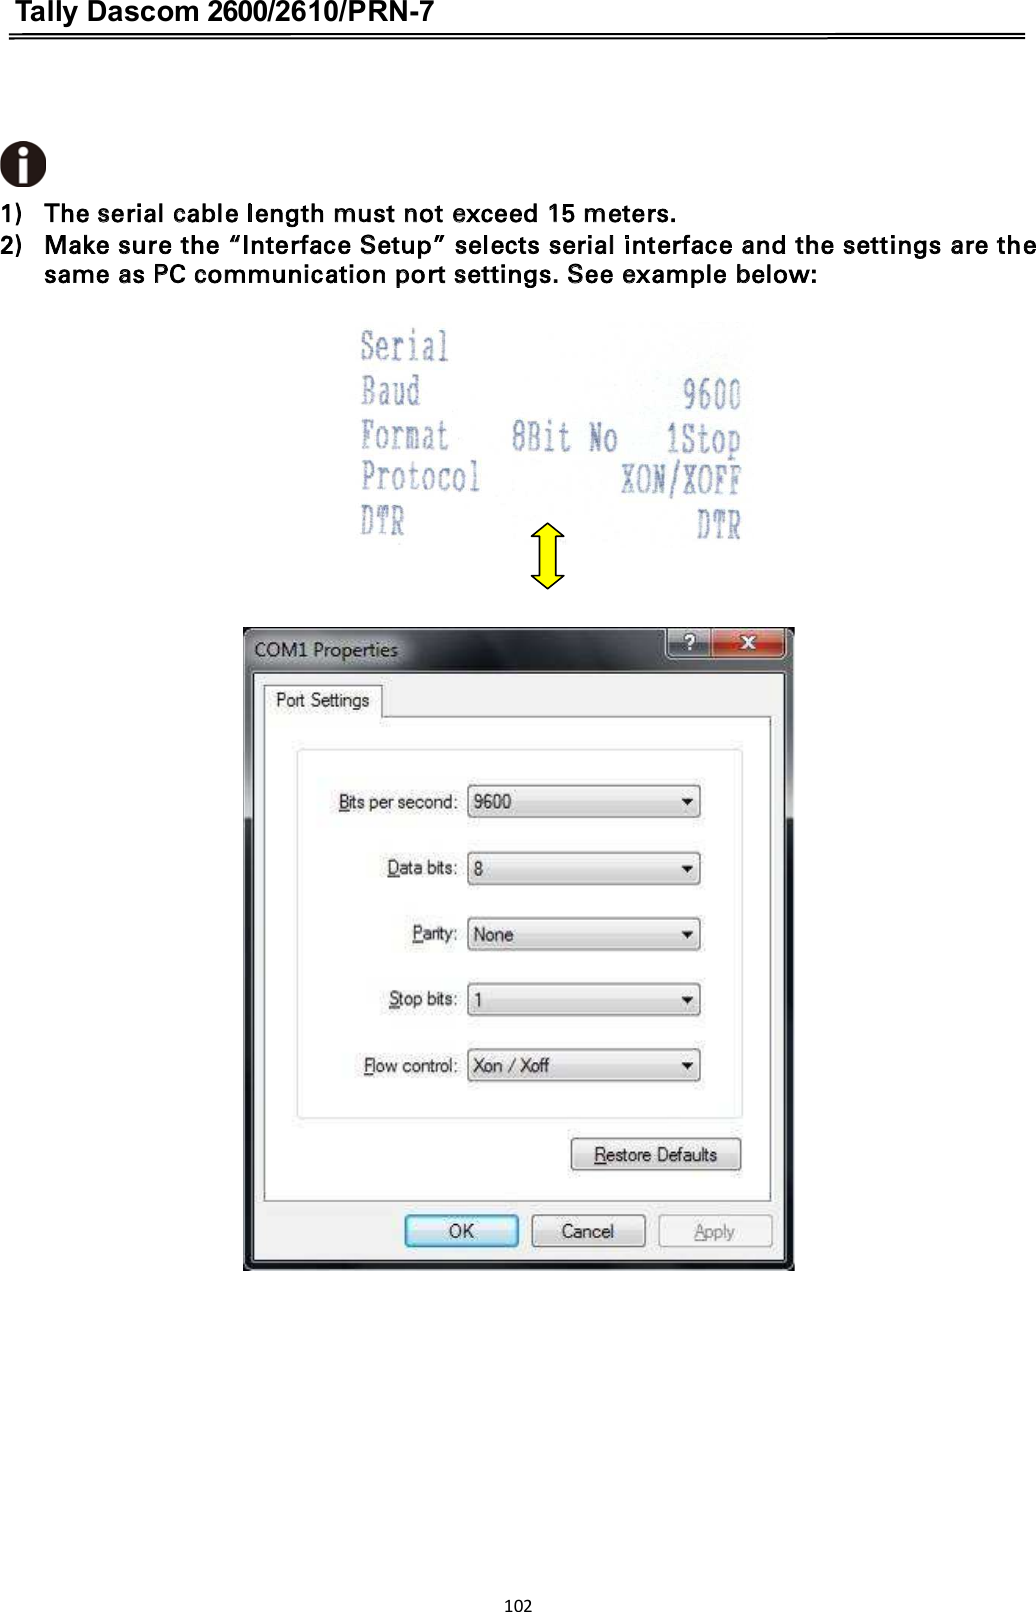 Tally Dascom 2600/2610/PRN-7    1) The serial cable length must not exceed 15 meters. 2) Make sure the “Interface Setup” selects serial interface and the settings are the same as PC communication port settings. See example below:          102  